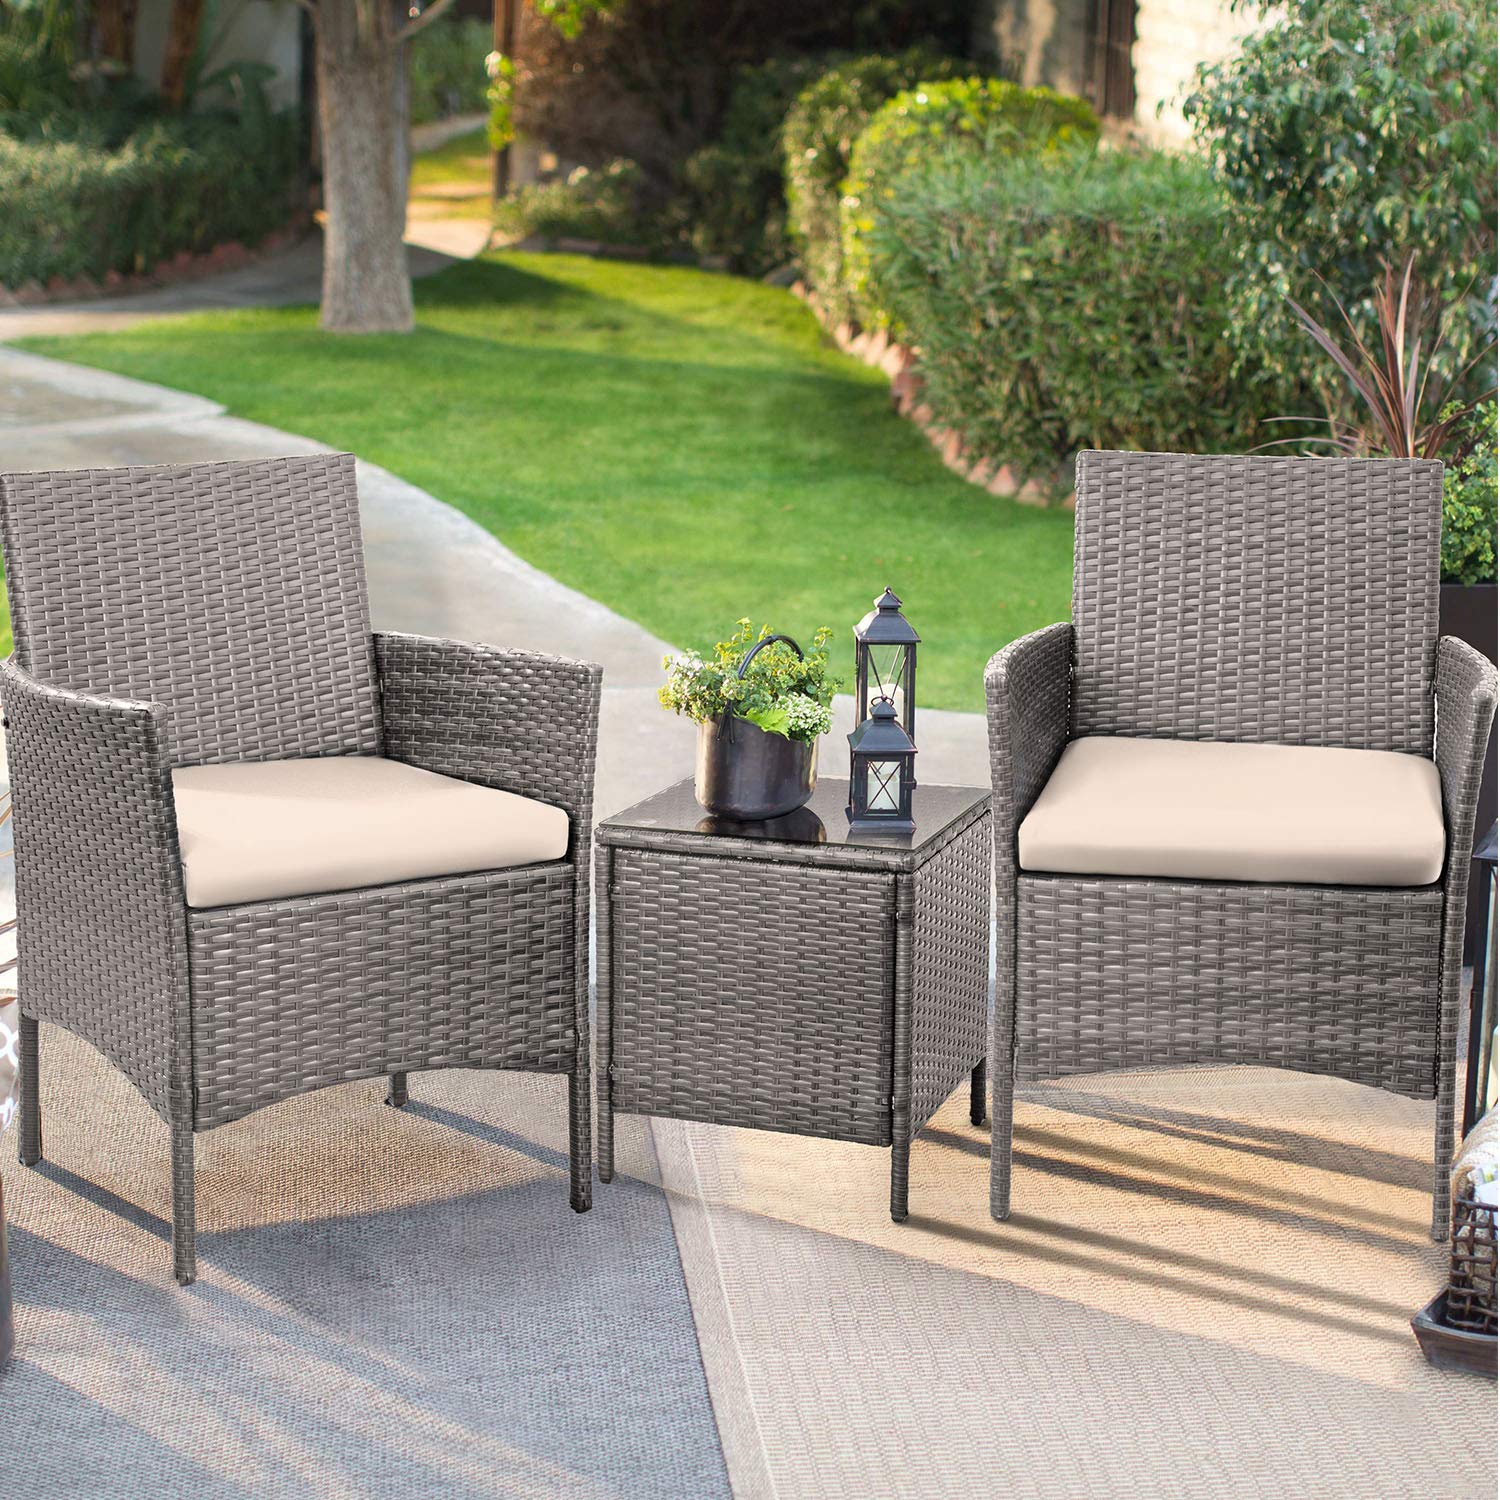 Lacoo 3 Pieces Outdoor Patio Furniture Gray PE Rattan Wicker Table and Chairs Set Bar Set with Cushioned Tempered Glass (Grey / Beige) 2 - image 1 of 6